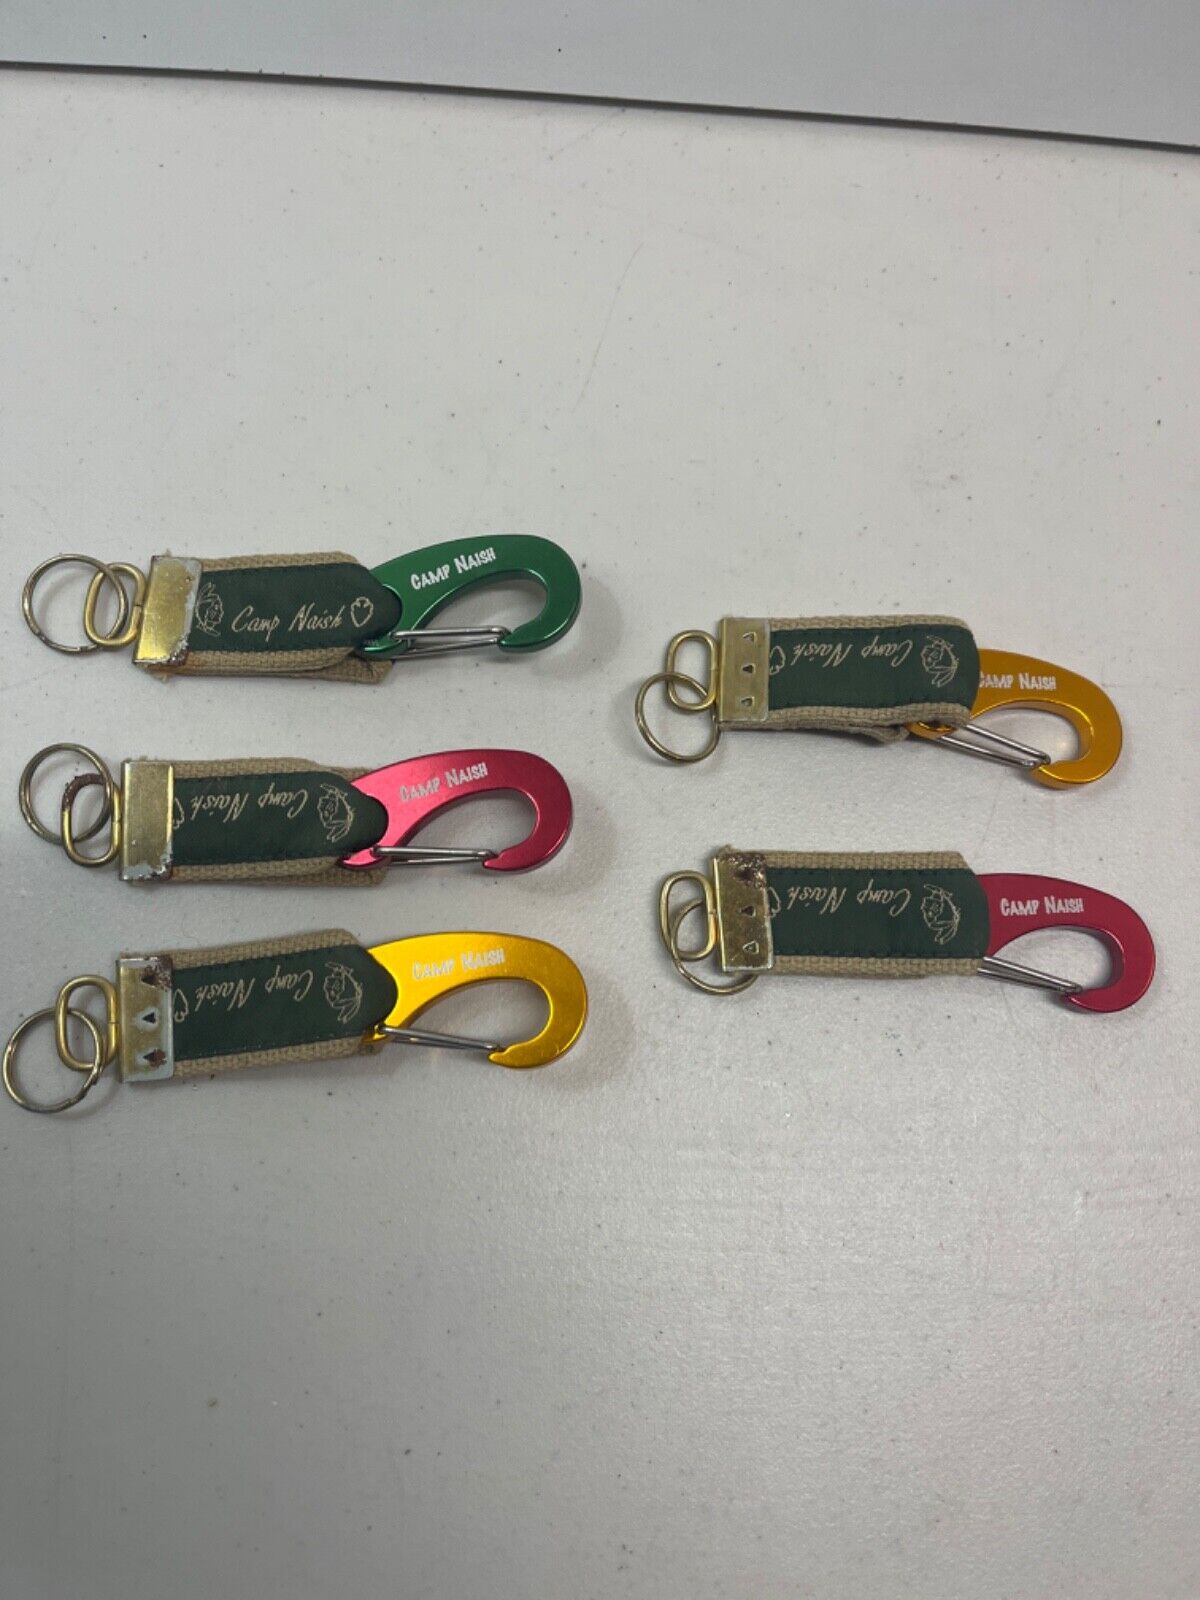 BSA Camp Naish Key Chains with Clips Lot of 5